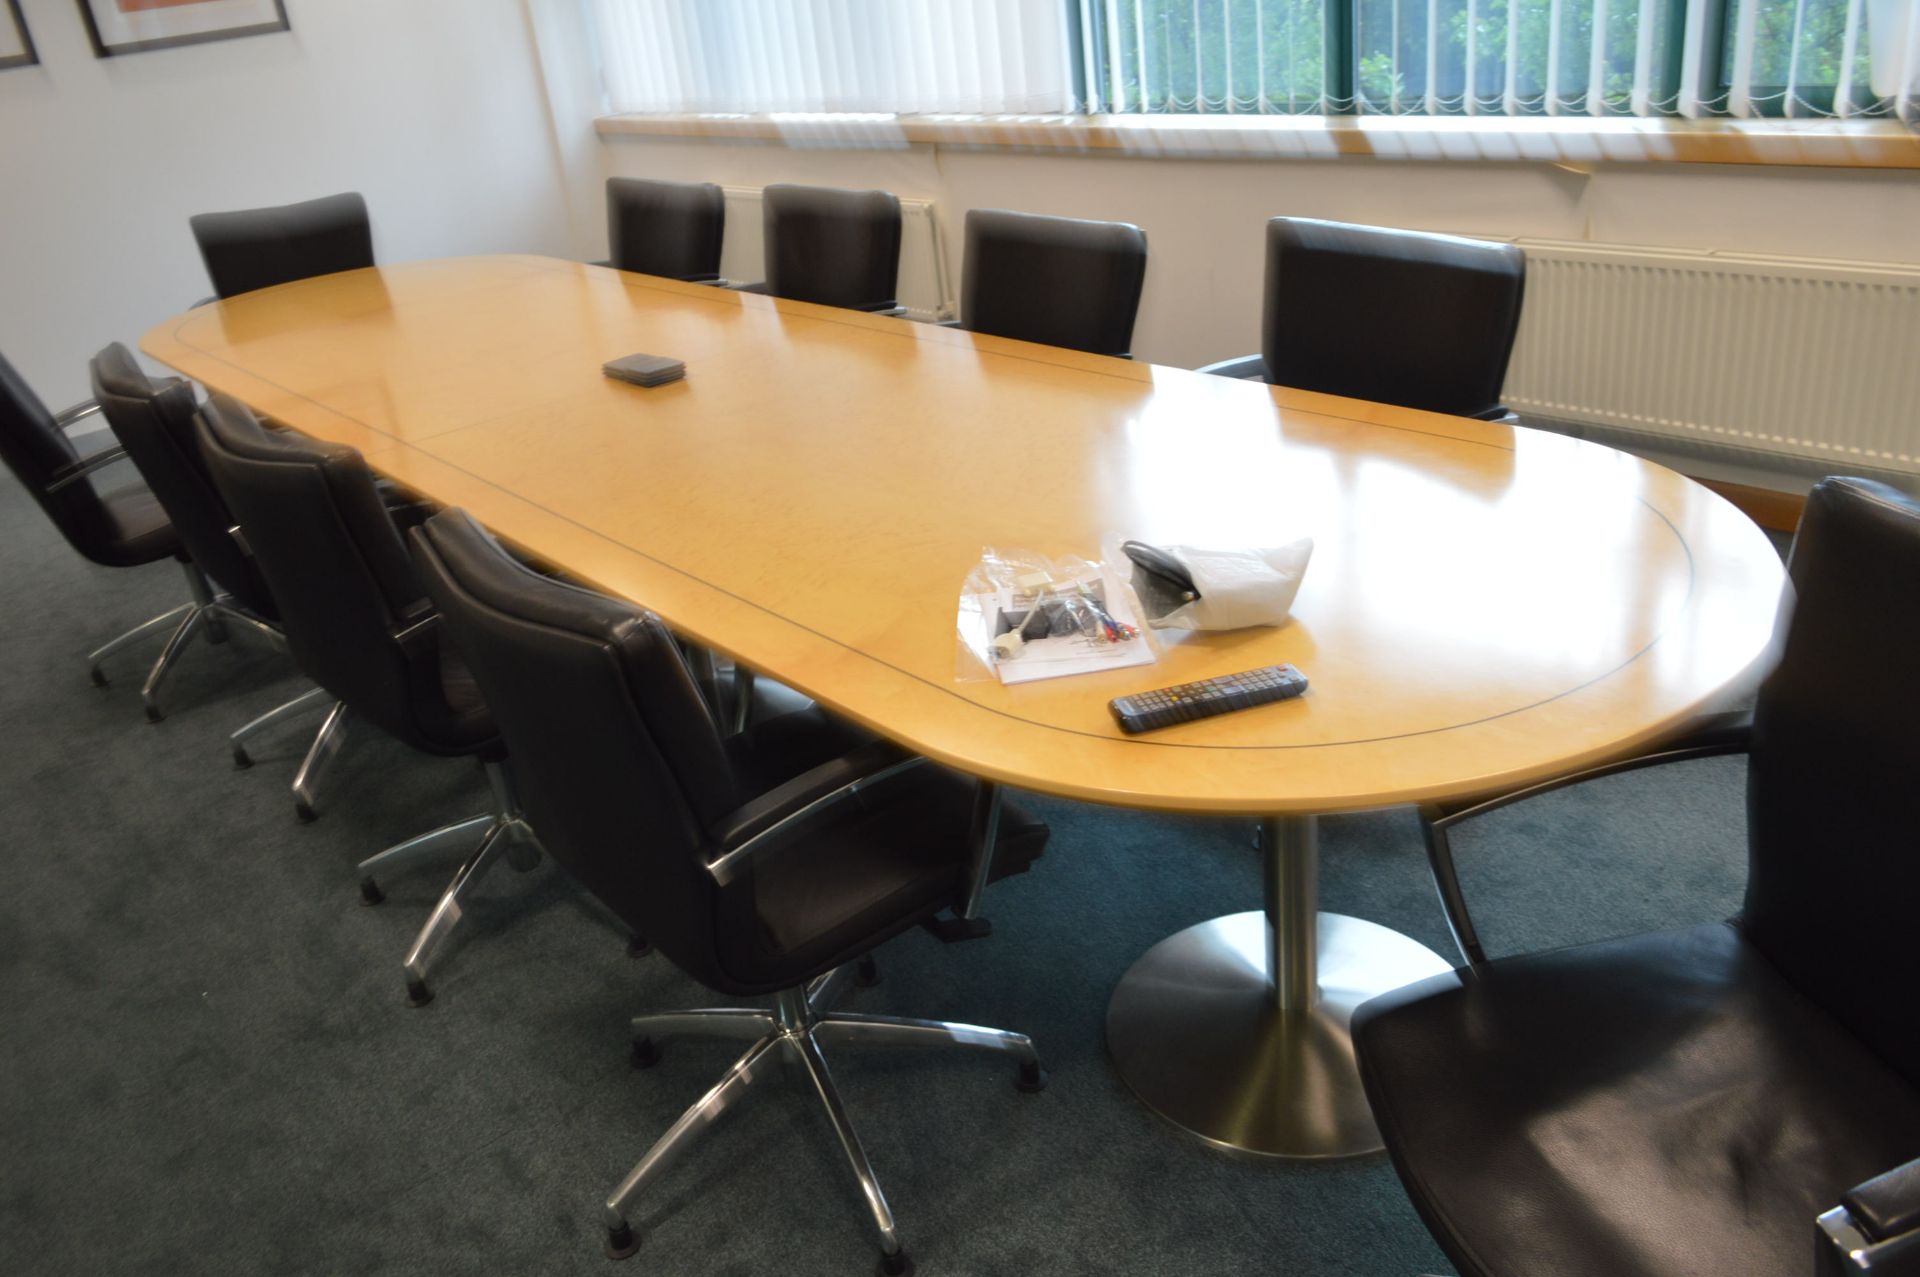 WOOD BOARDROOM TABLE, approx. 4.5m x 1.2m (Please note this item is located at Avocado Court, 3 - Image 2 of 2